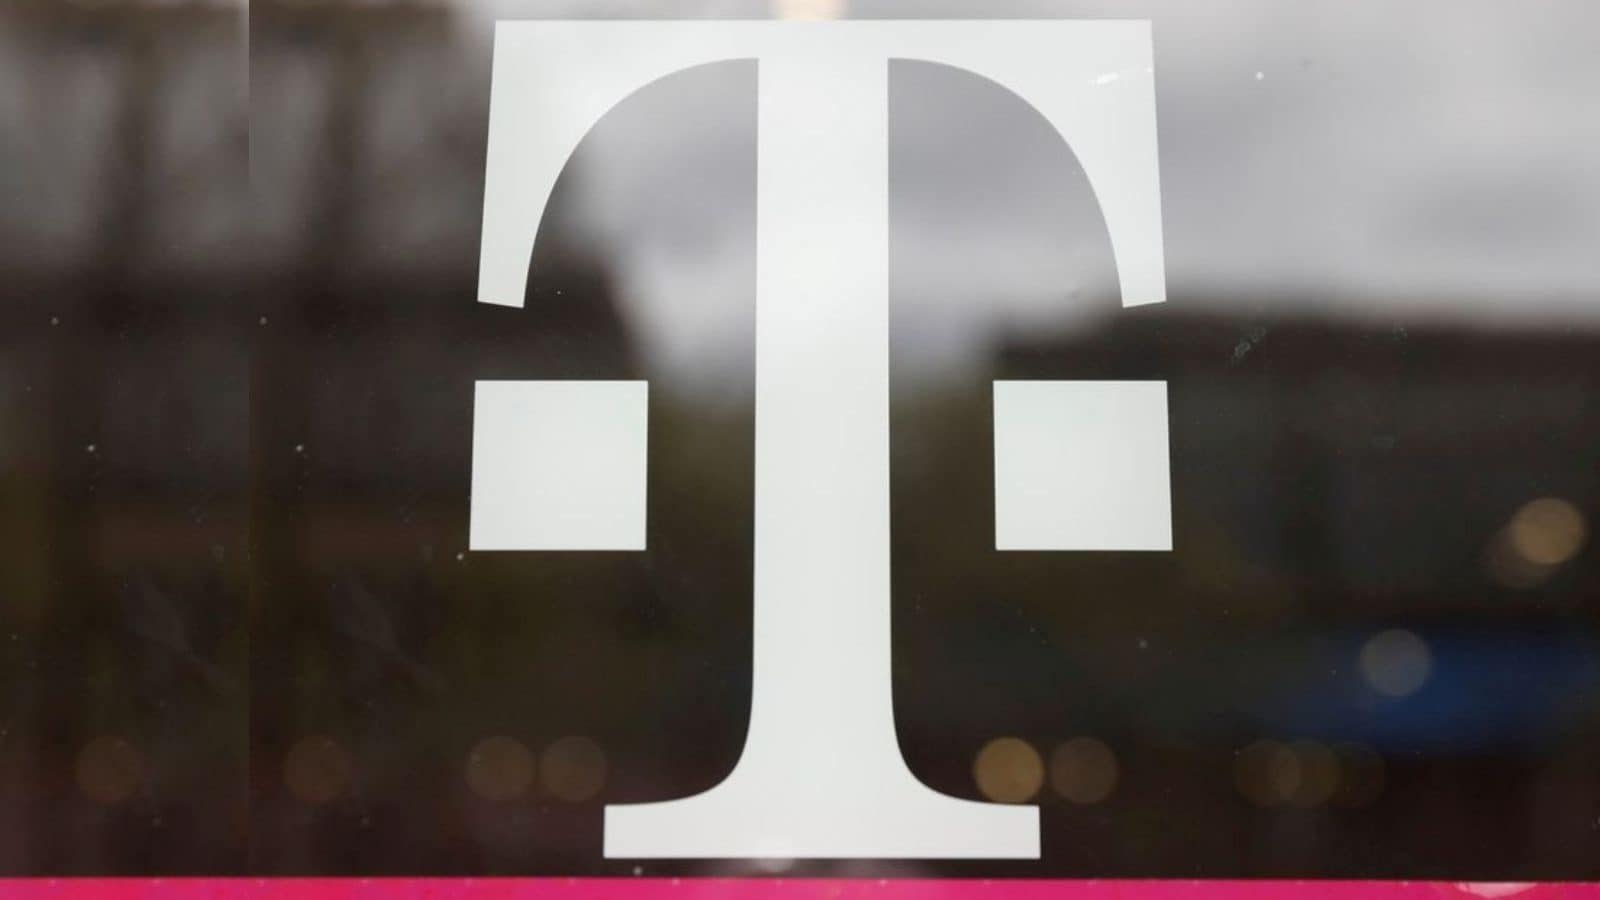 T-Mobile Data Breach Impacted 53 Million Customers, Probe Finds Wider Scale